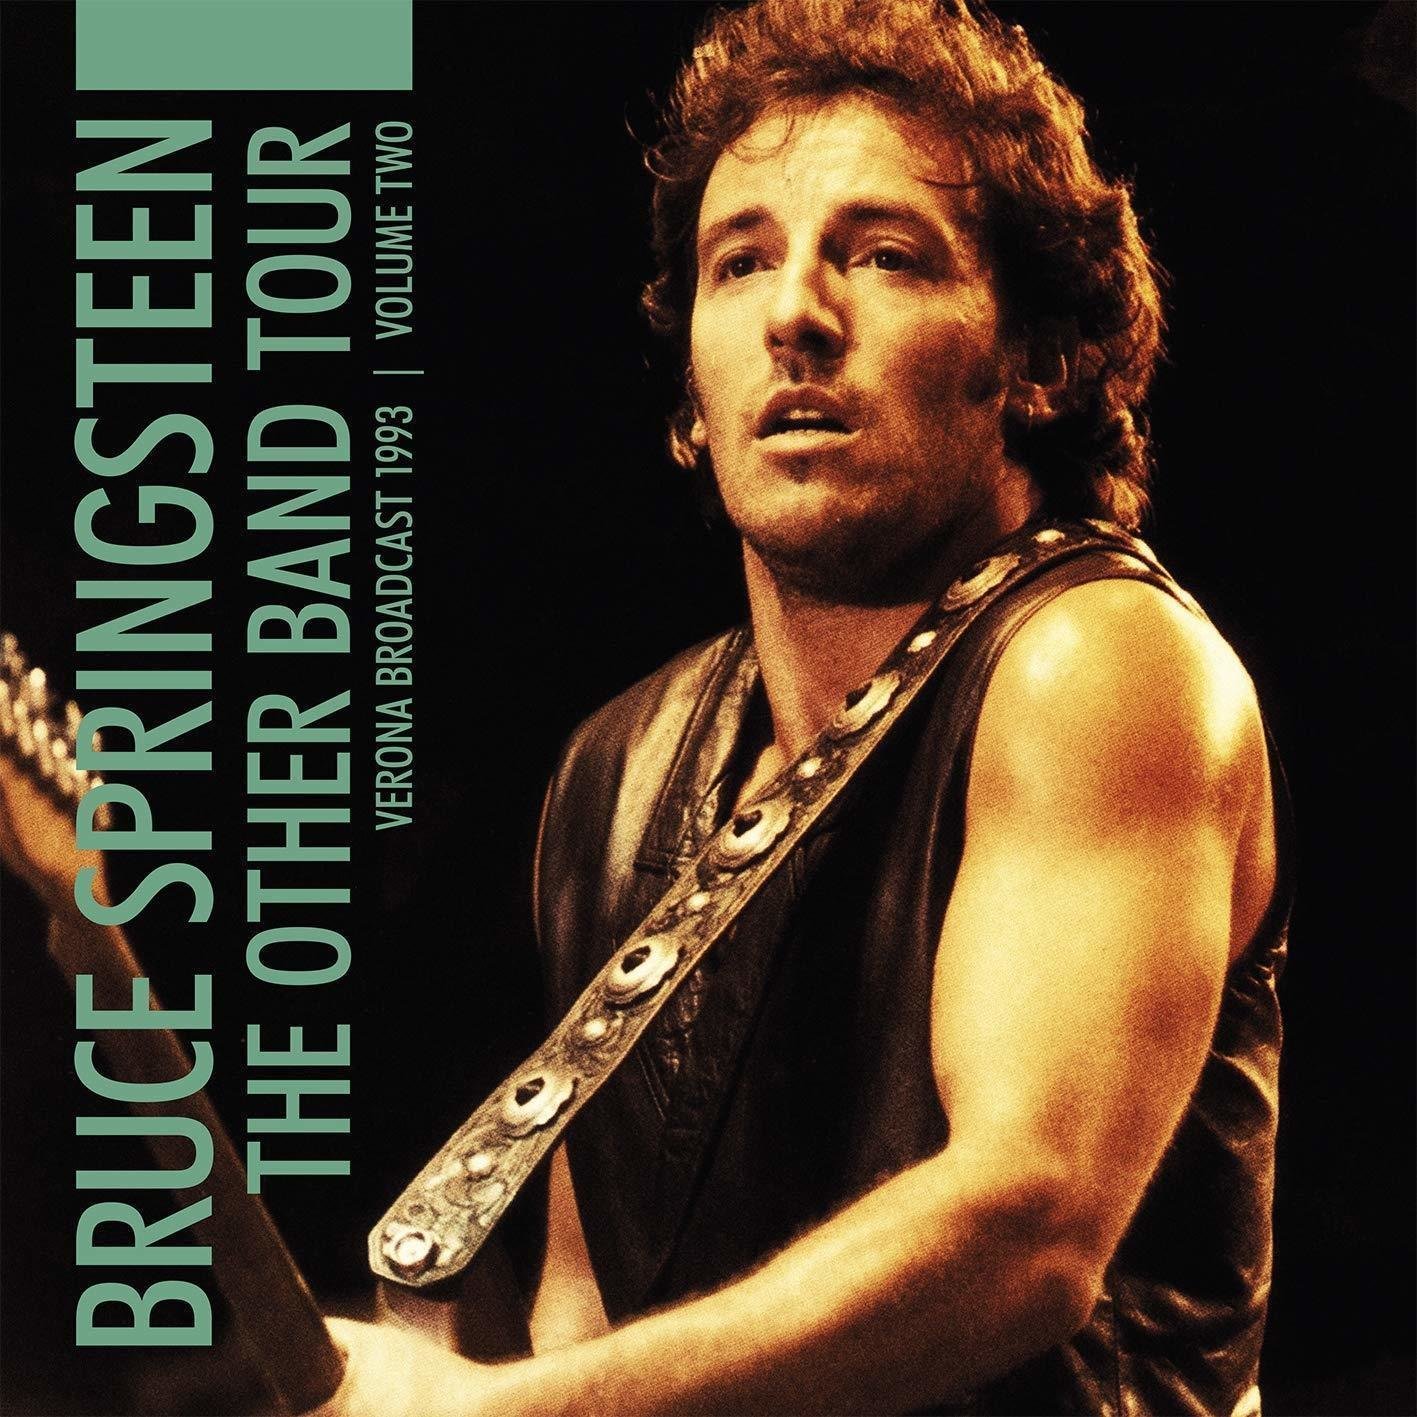 LP Bruce Springsteen - The Other Band Tour - Verona Broadcast 1993 - Volume Two (2 LP)